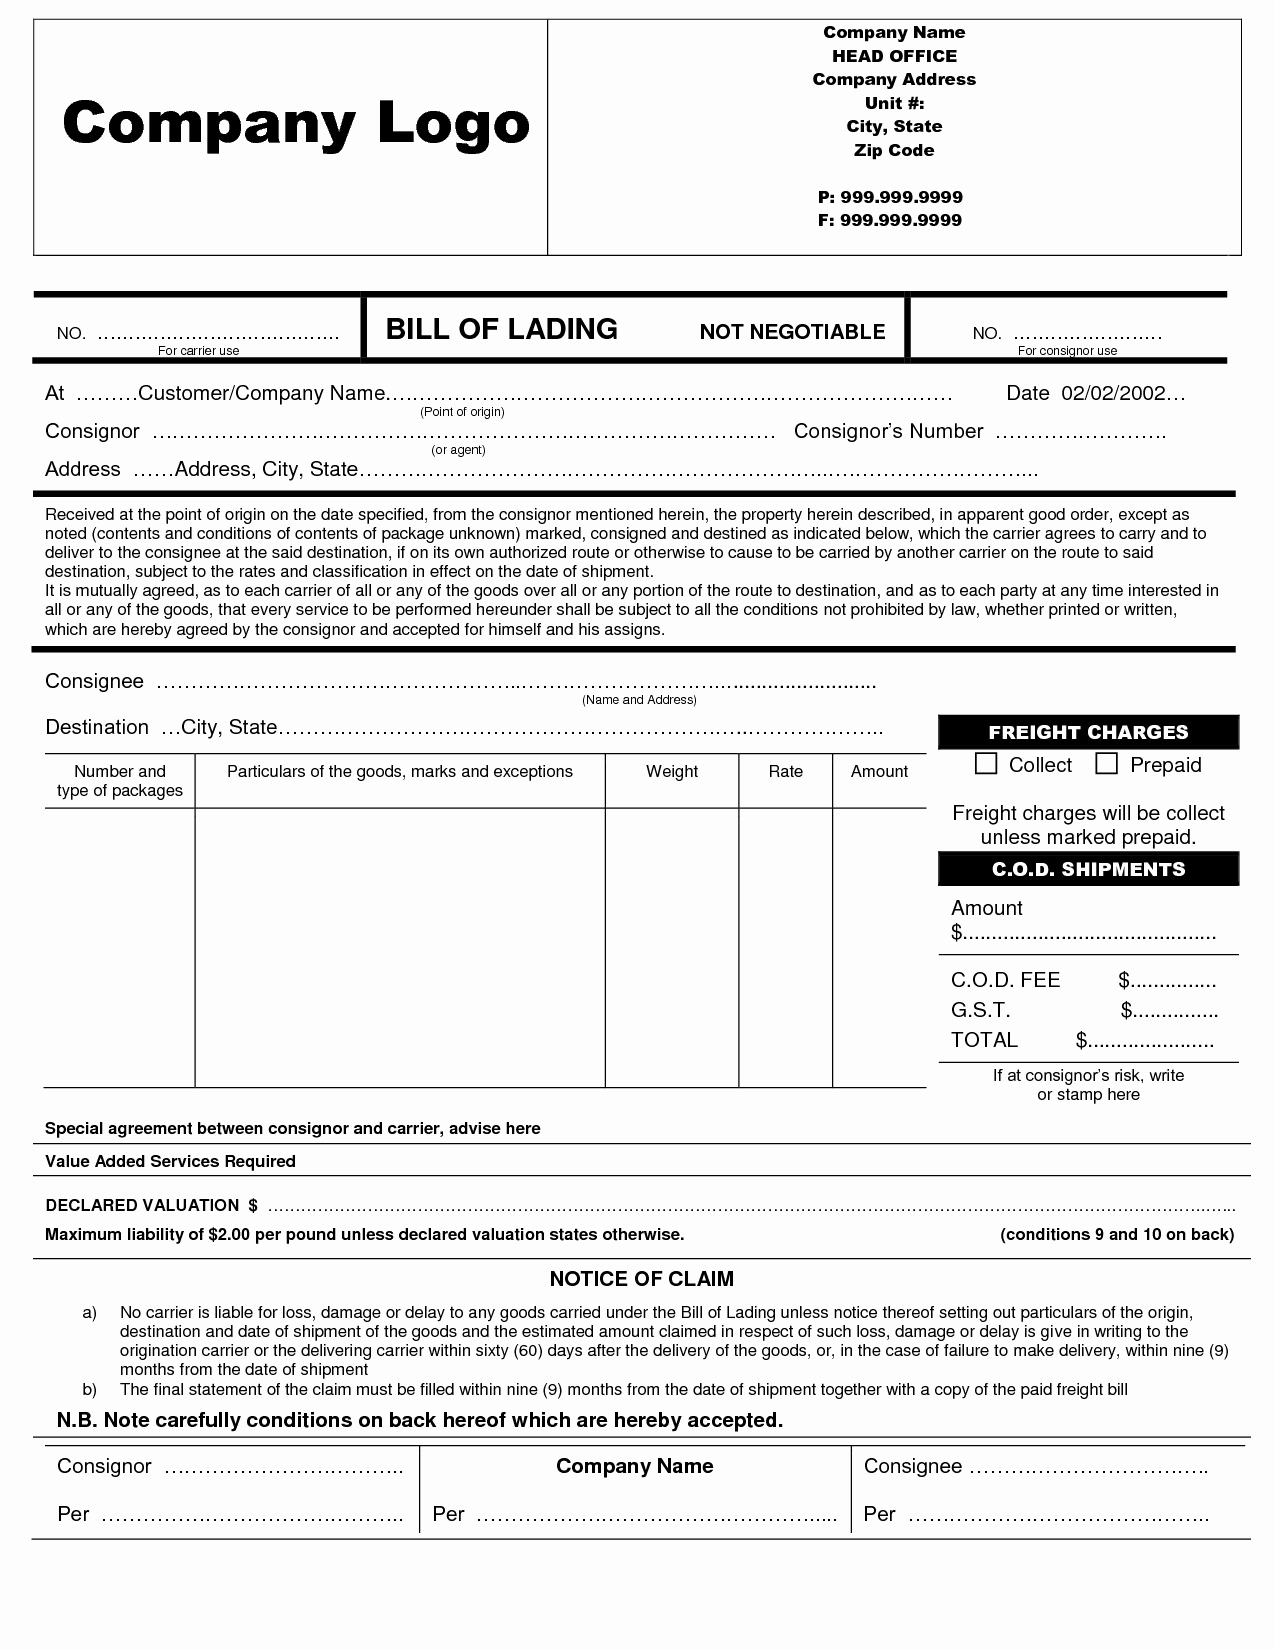 Generic Bill Of Lading Luxury Estes Express Bill Of Lading Pdf Download